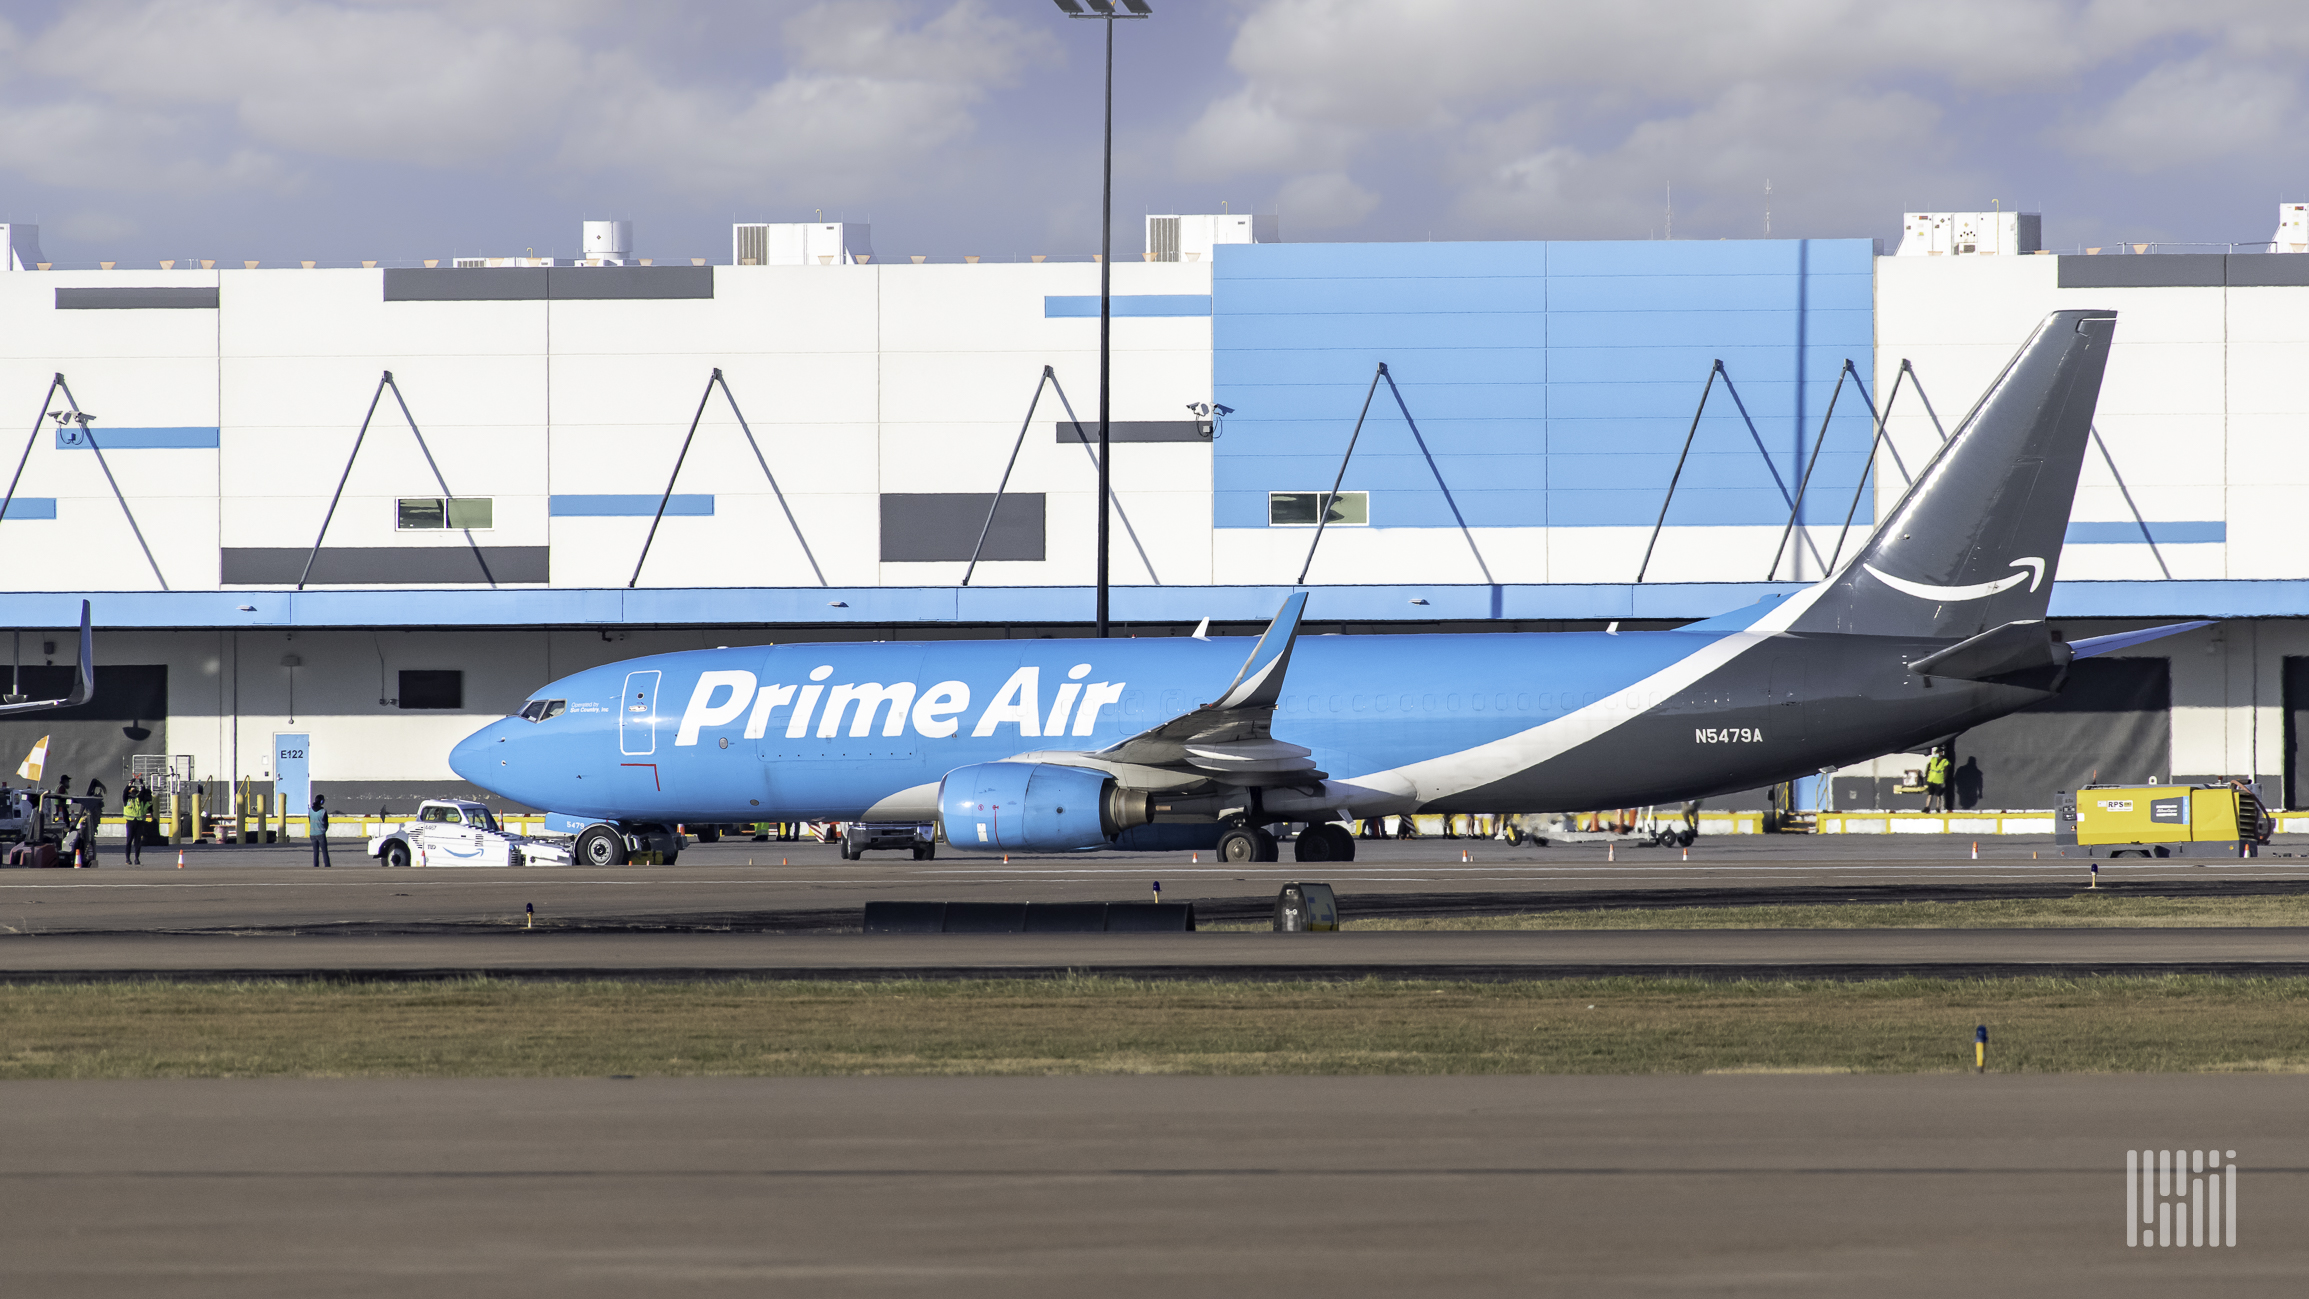 Amazon Air’s new reliance on hub airports increases efficiency